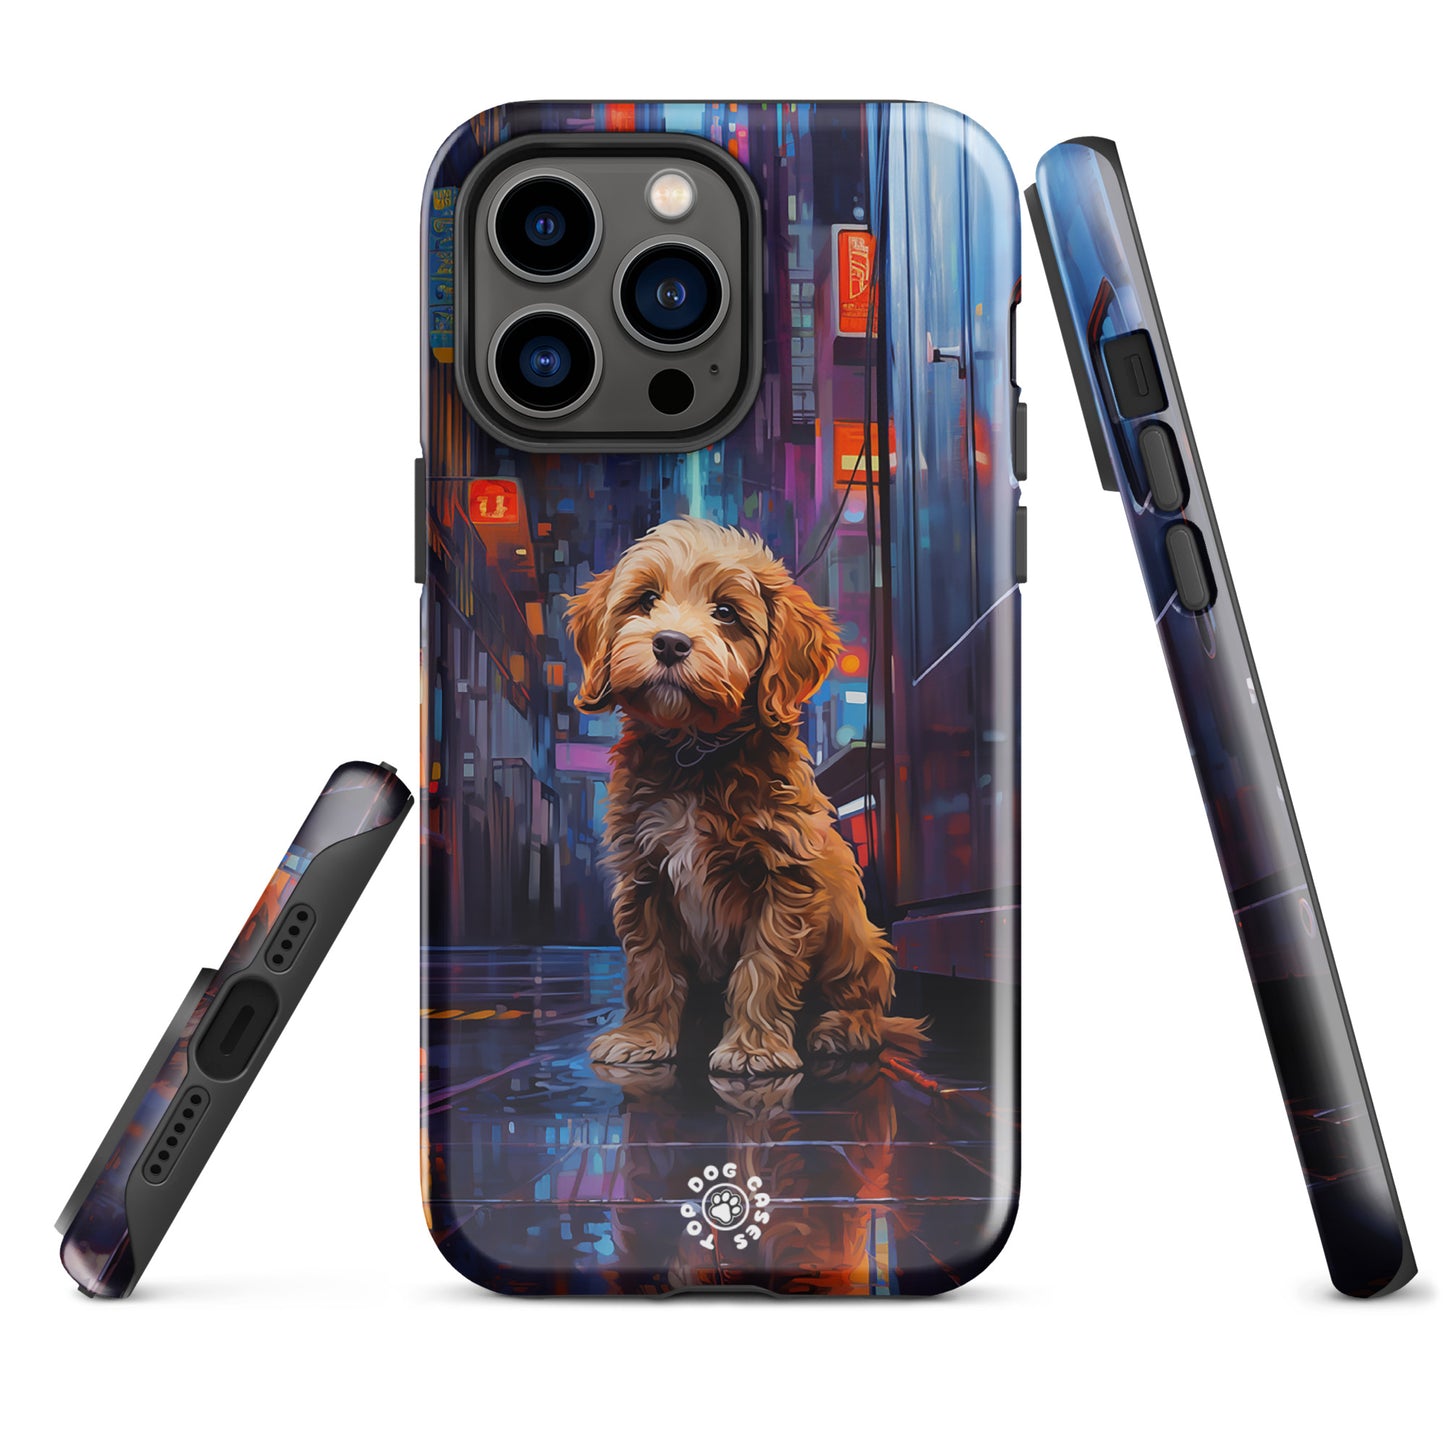 Goldendoodle in the City - iPhone Case - Cute Phone Cases - Top Dog Cases - #CuteDog, #CuteDogs, #Goldendoodle, #iPhone, #iPhone11, #iphone11case, #iPhone12, #iPhone12case, #iPhone13, #iPhone13case, #iPhone13DogCase, #iPhone13Mini, #iPhone13Pro, #iPhone13ProMax, #iPhone14, #iPhone14case, #iPhone14DogCase, #iPhone14Plus, #iPhone14Pluscase, #iPhone14Pro, #iPhone14ProMax, #iPhone14ProMaxCase, #iPhone15, #iPhone15case, #iPhonecase, #iphonedogcase, #MiniGoldendoodle, #MiniGoldendoodleCase